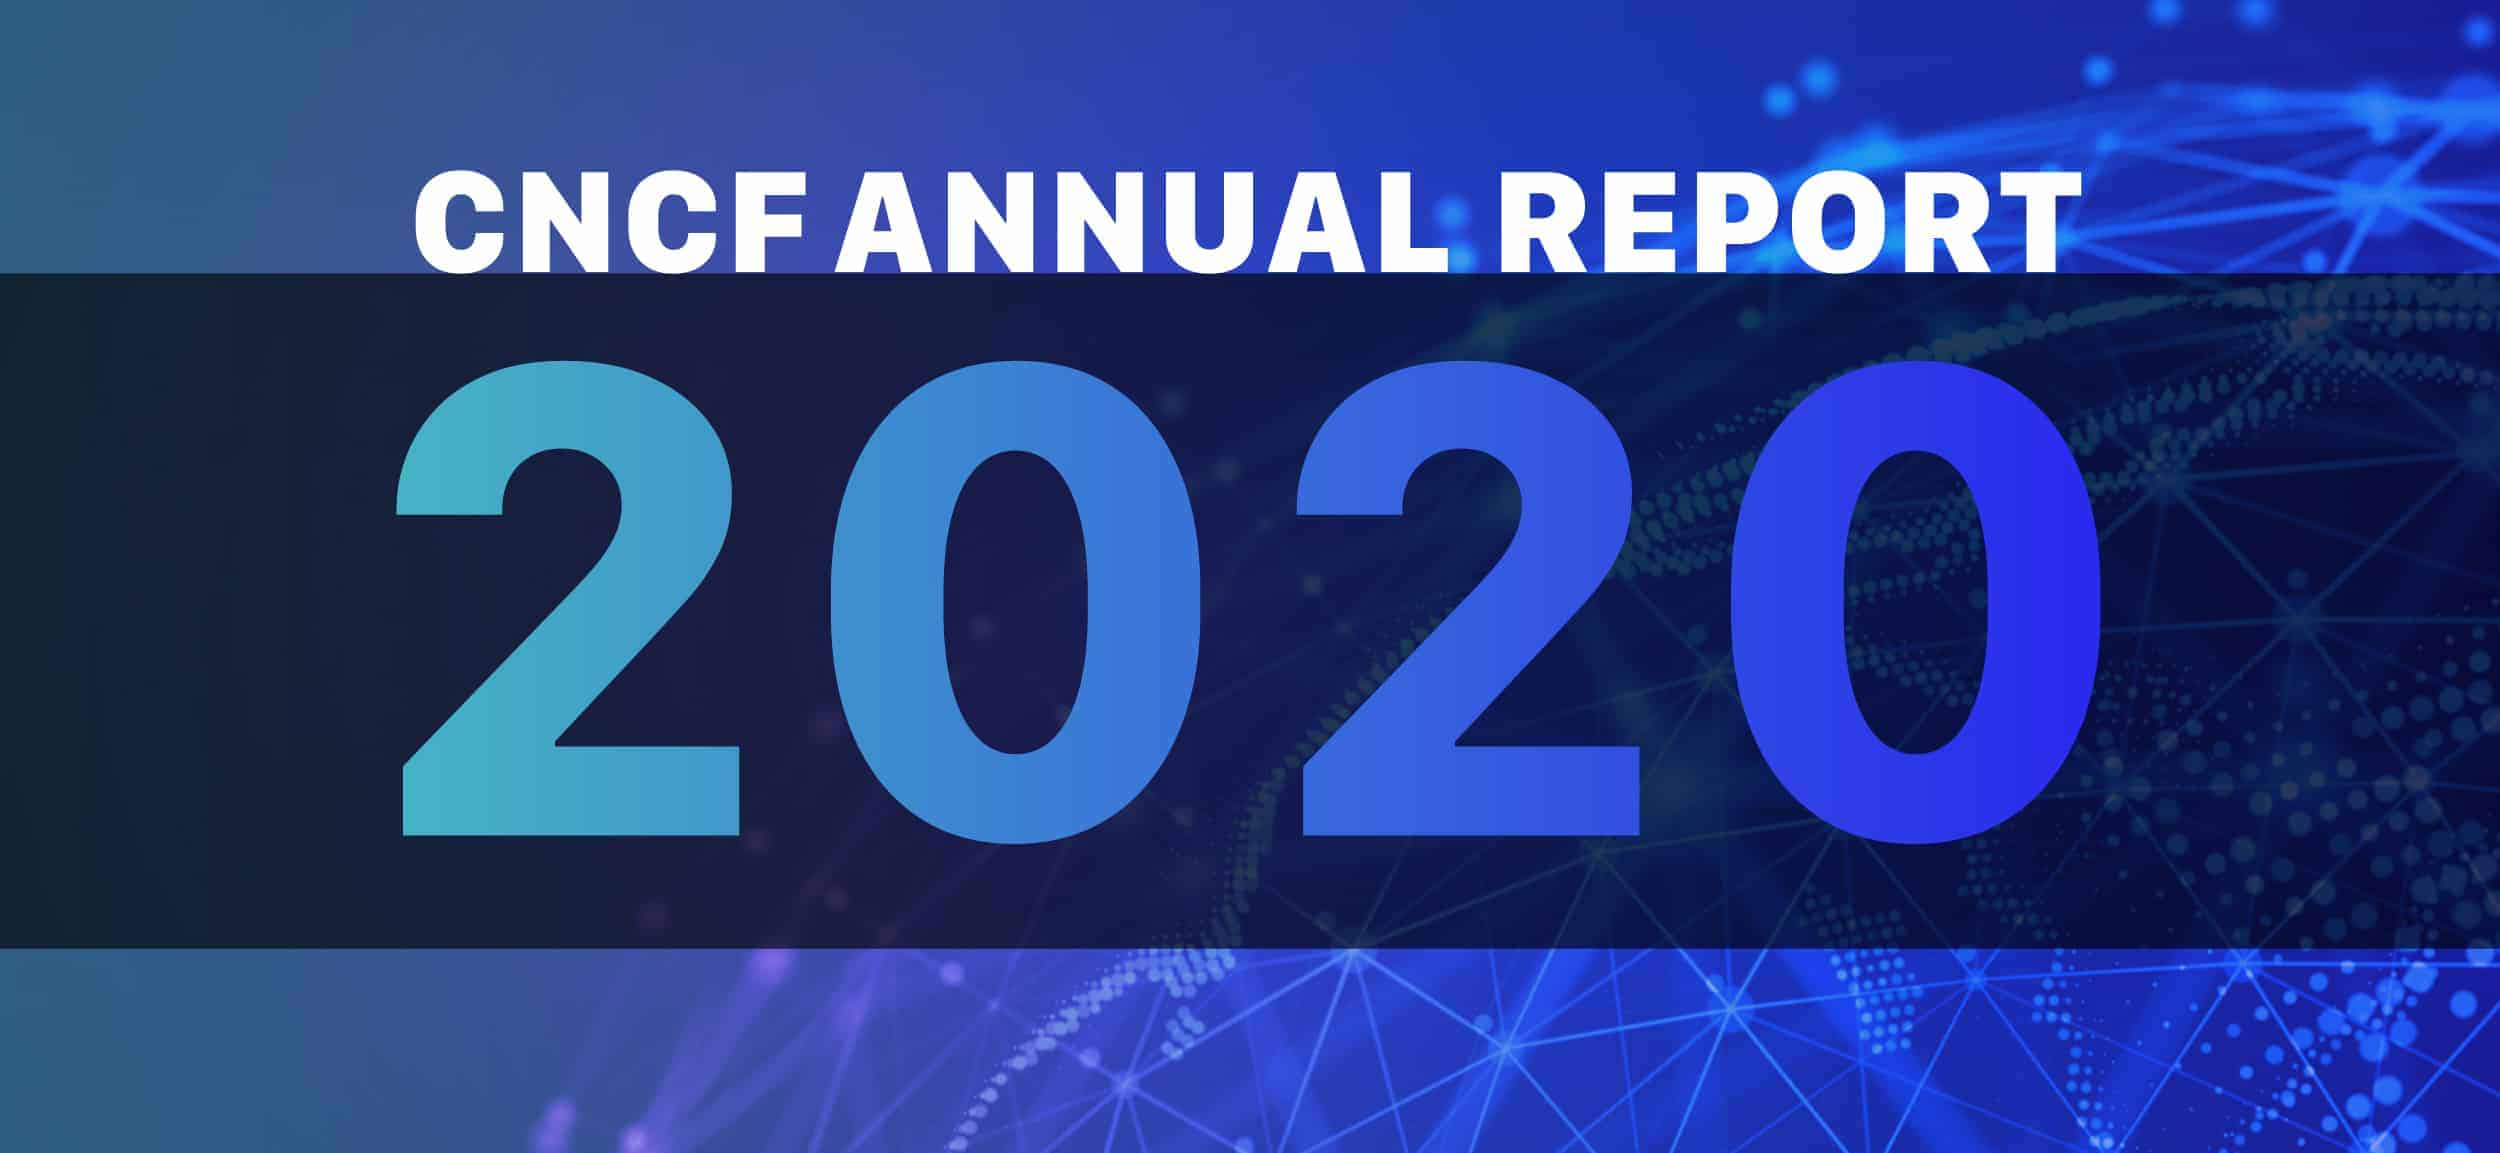 CNCF Annual Report 2020 | Cloud Native Computing Foundation